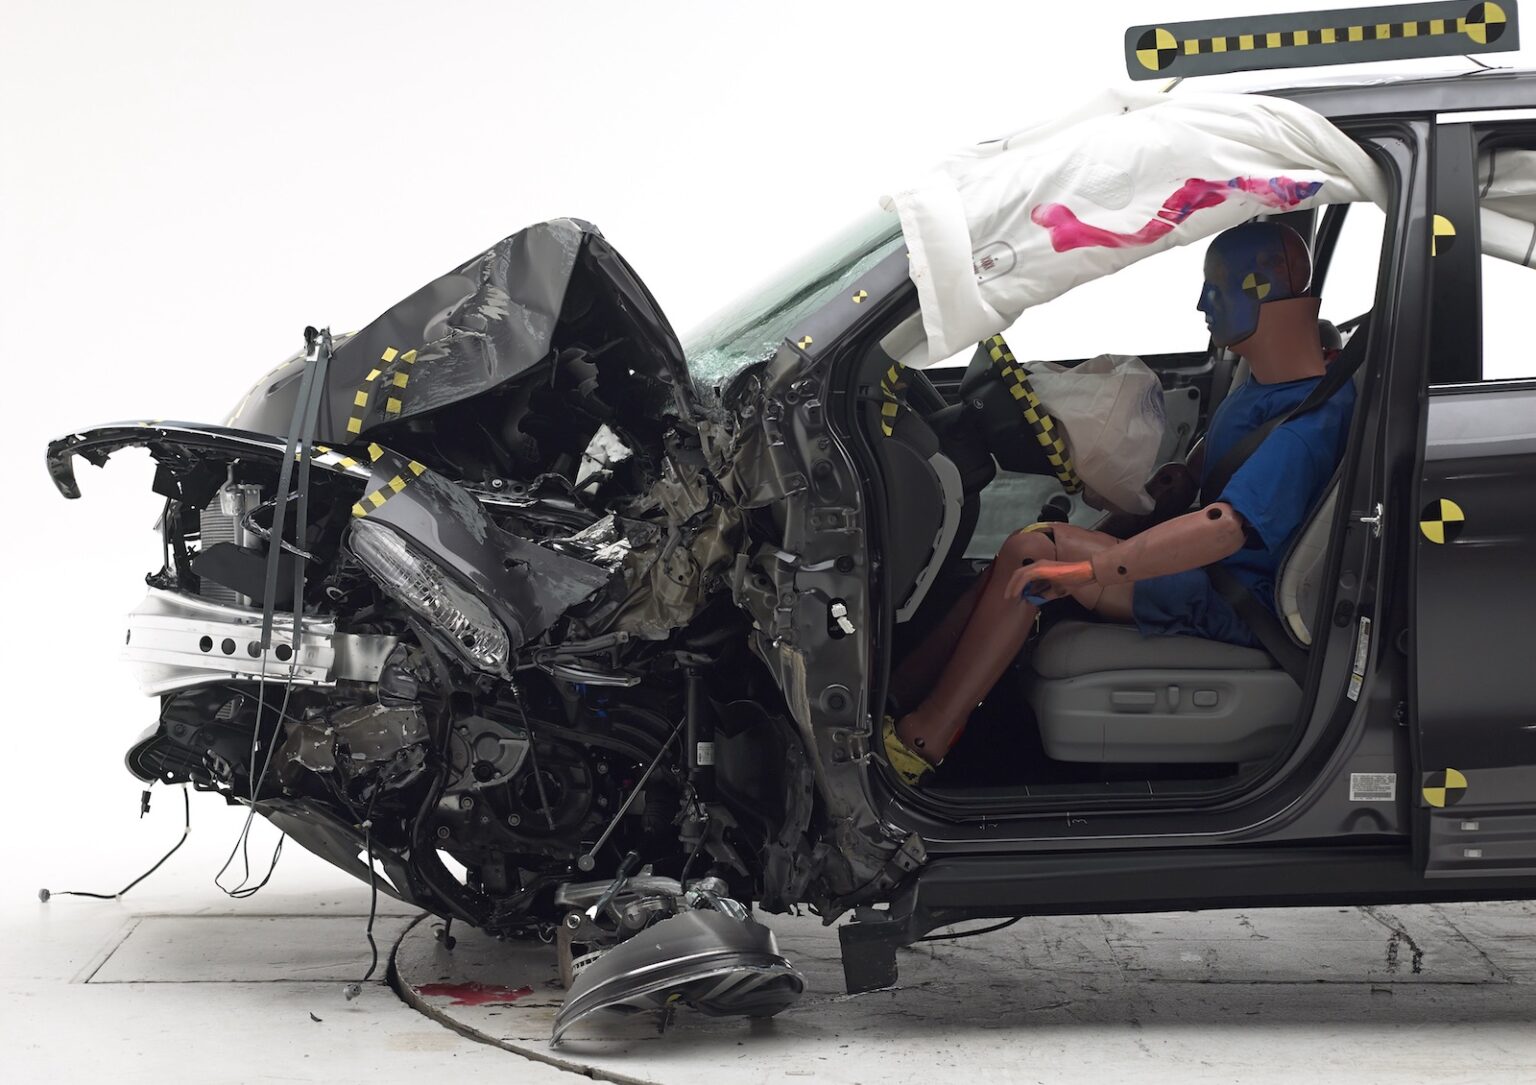 small overlap front crash test 